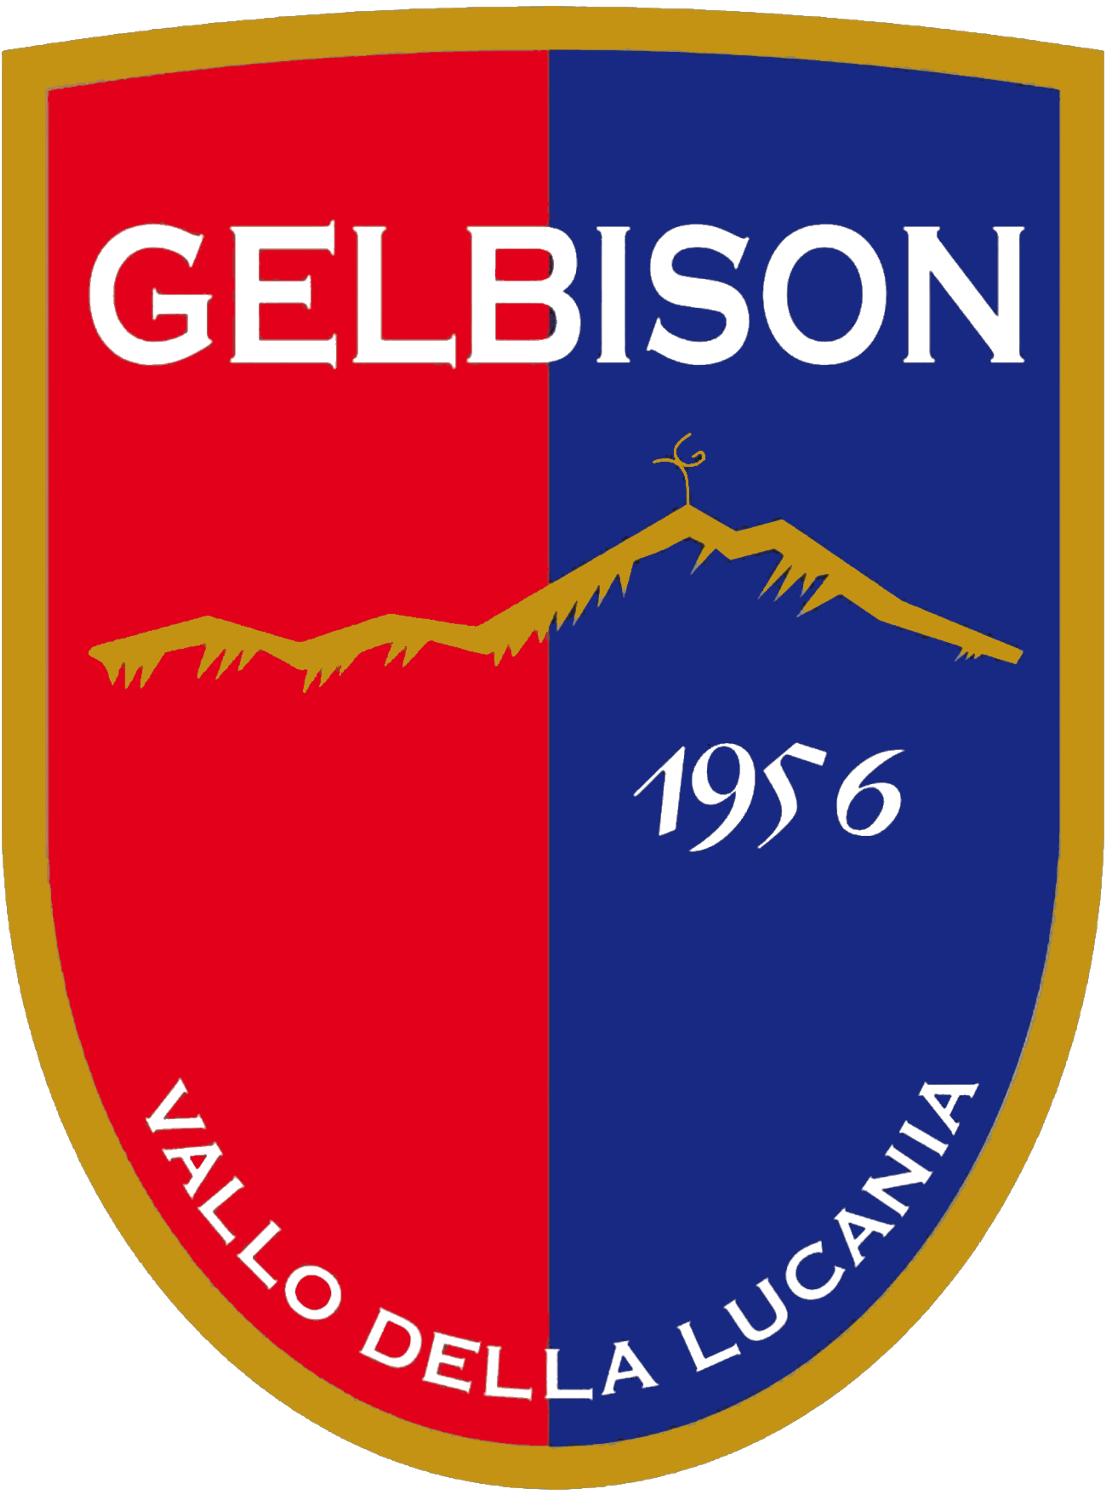 A.S. GELBISON